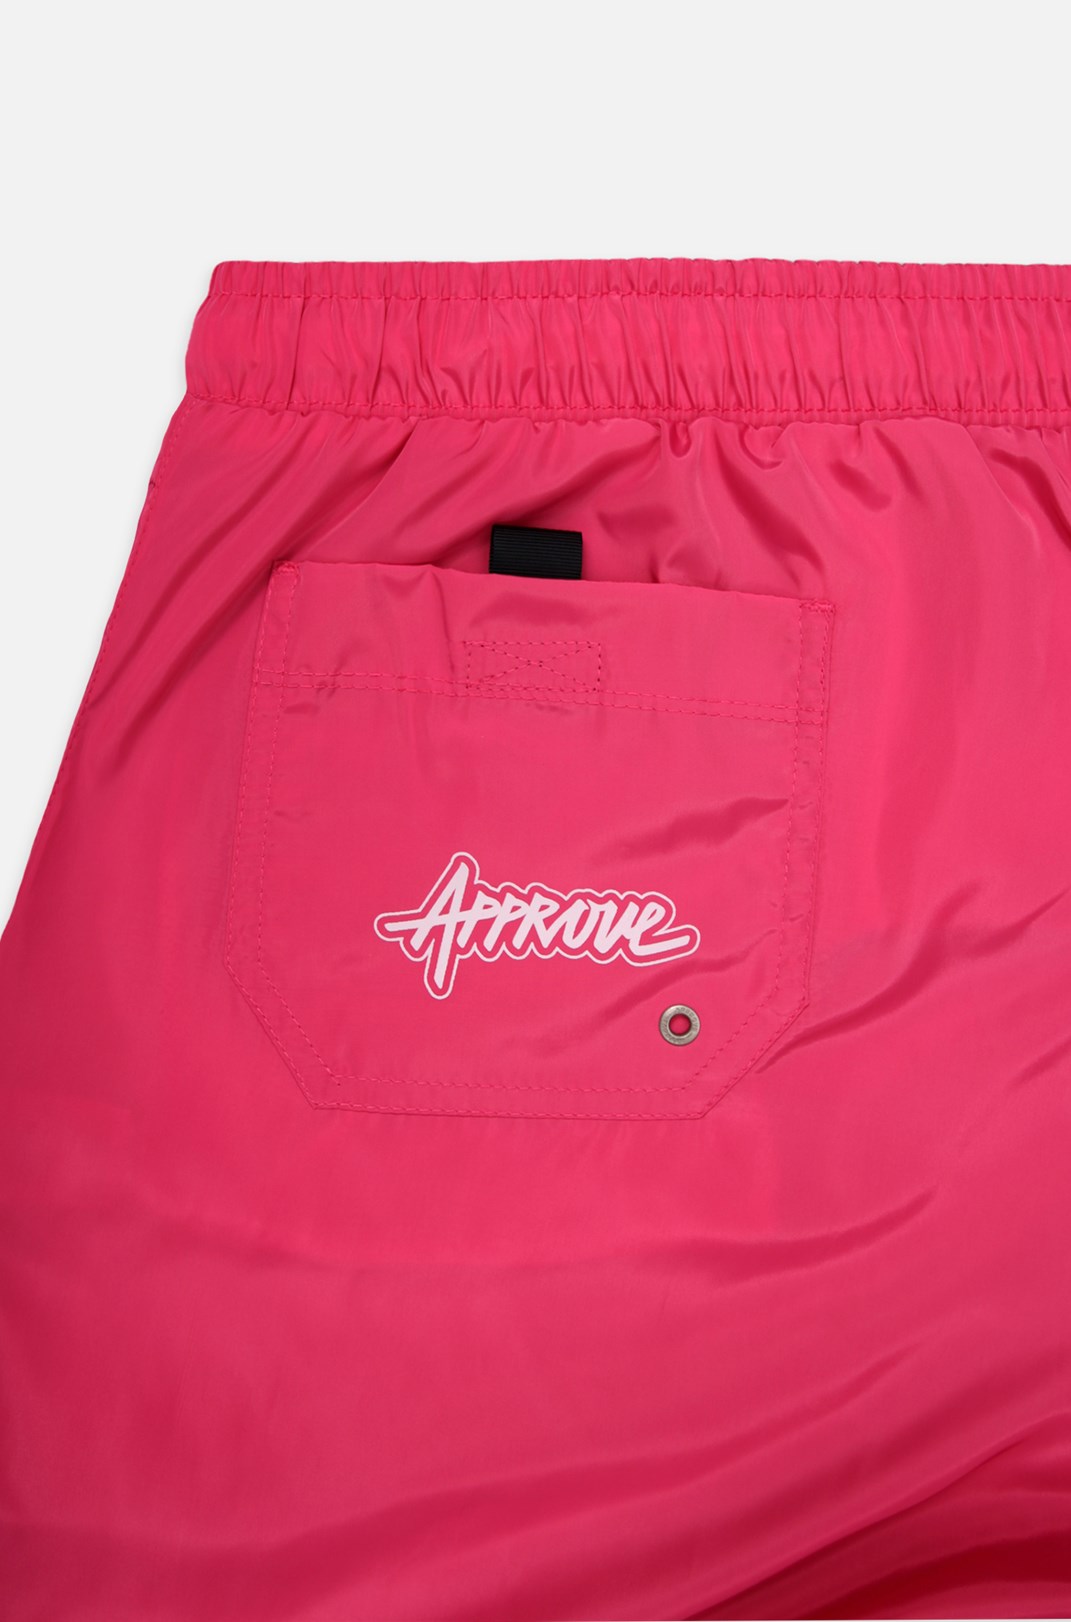 Shorts Approve Pink